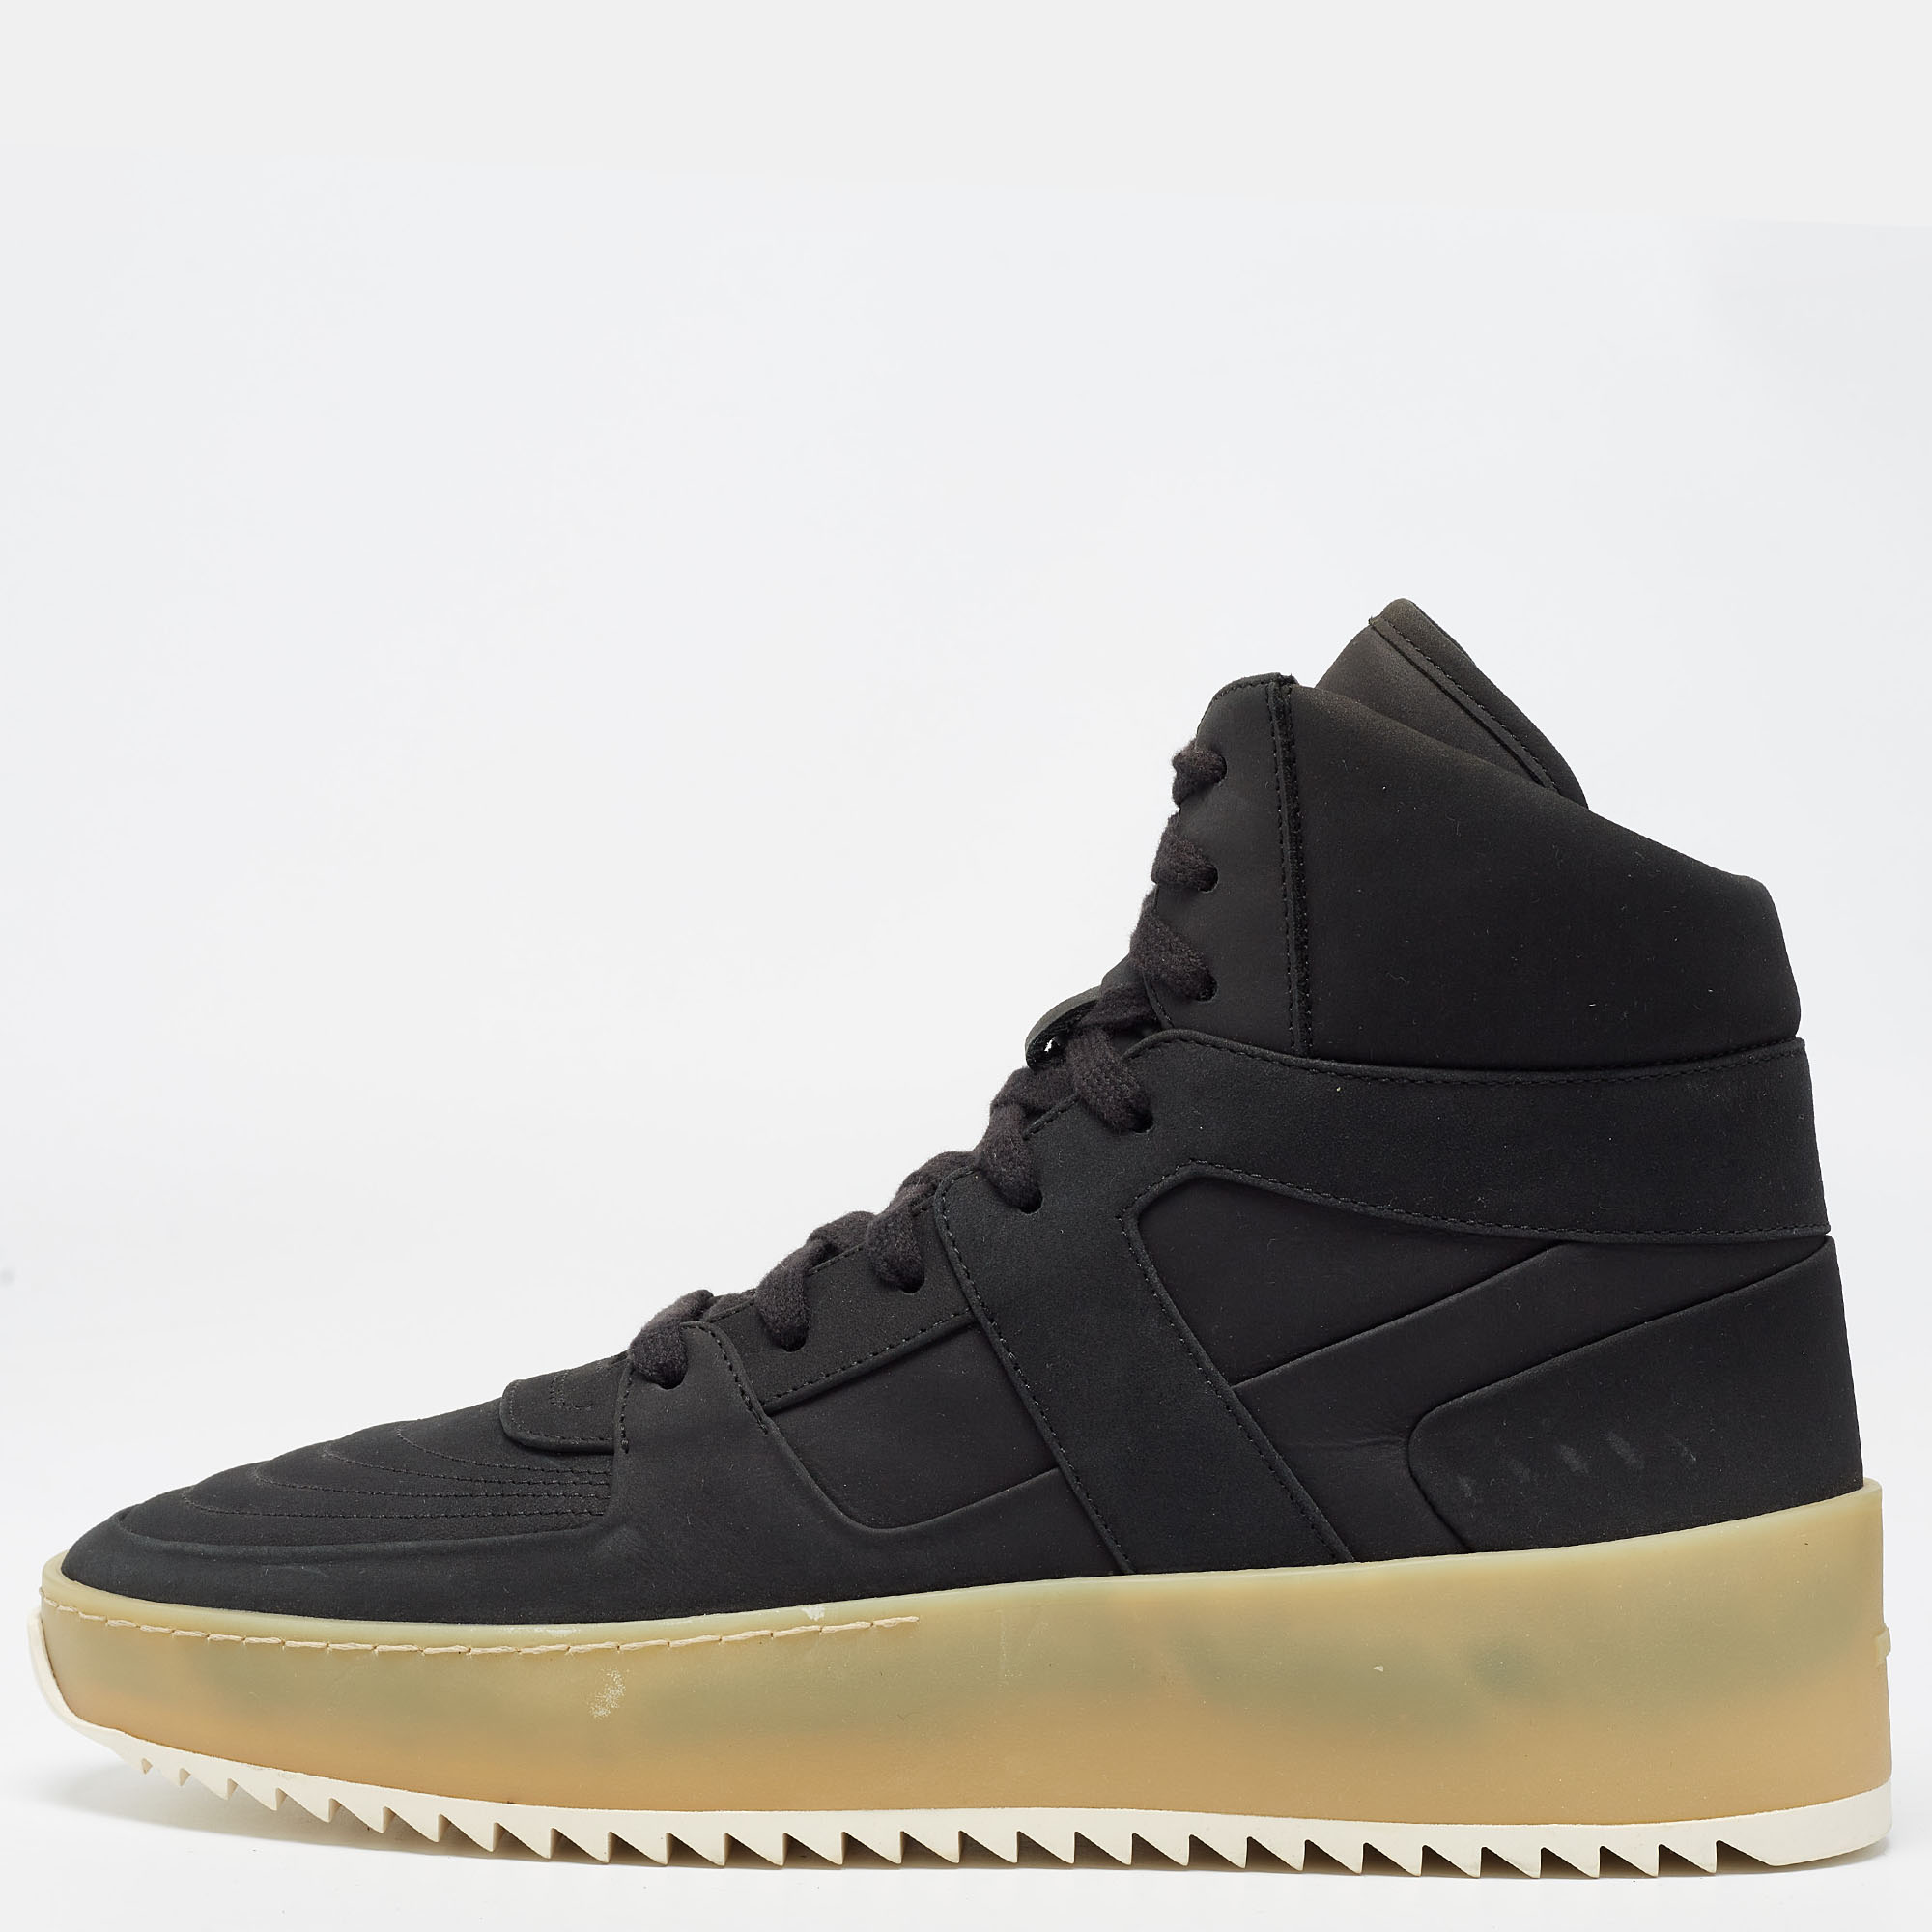 Fear of god black nubuck high top sneakers size 41